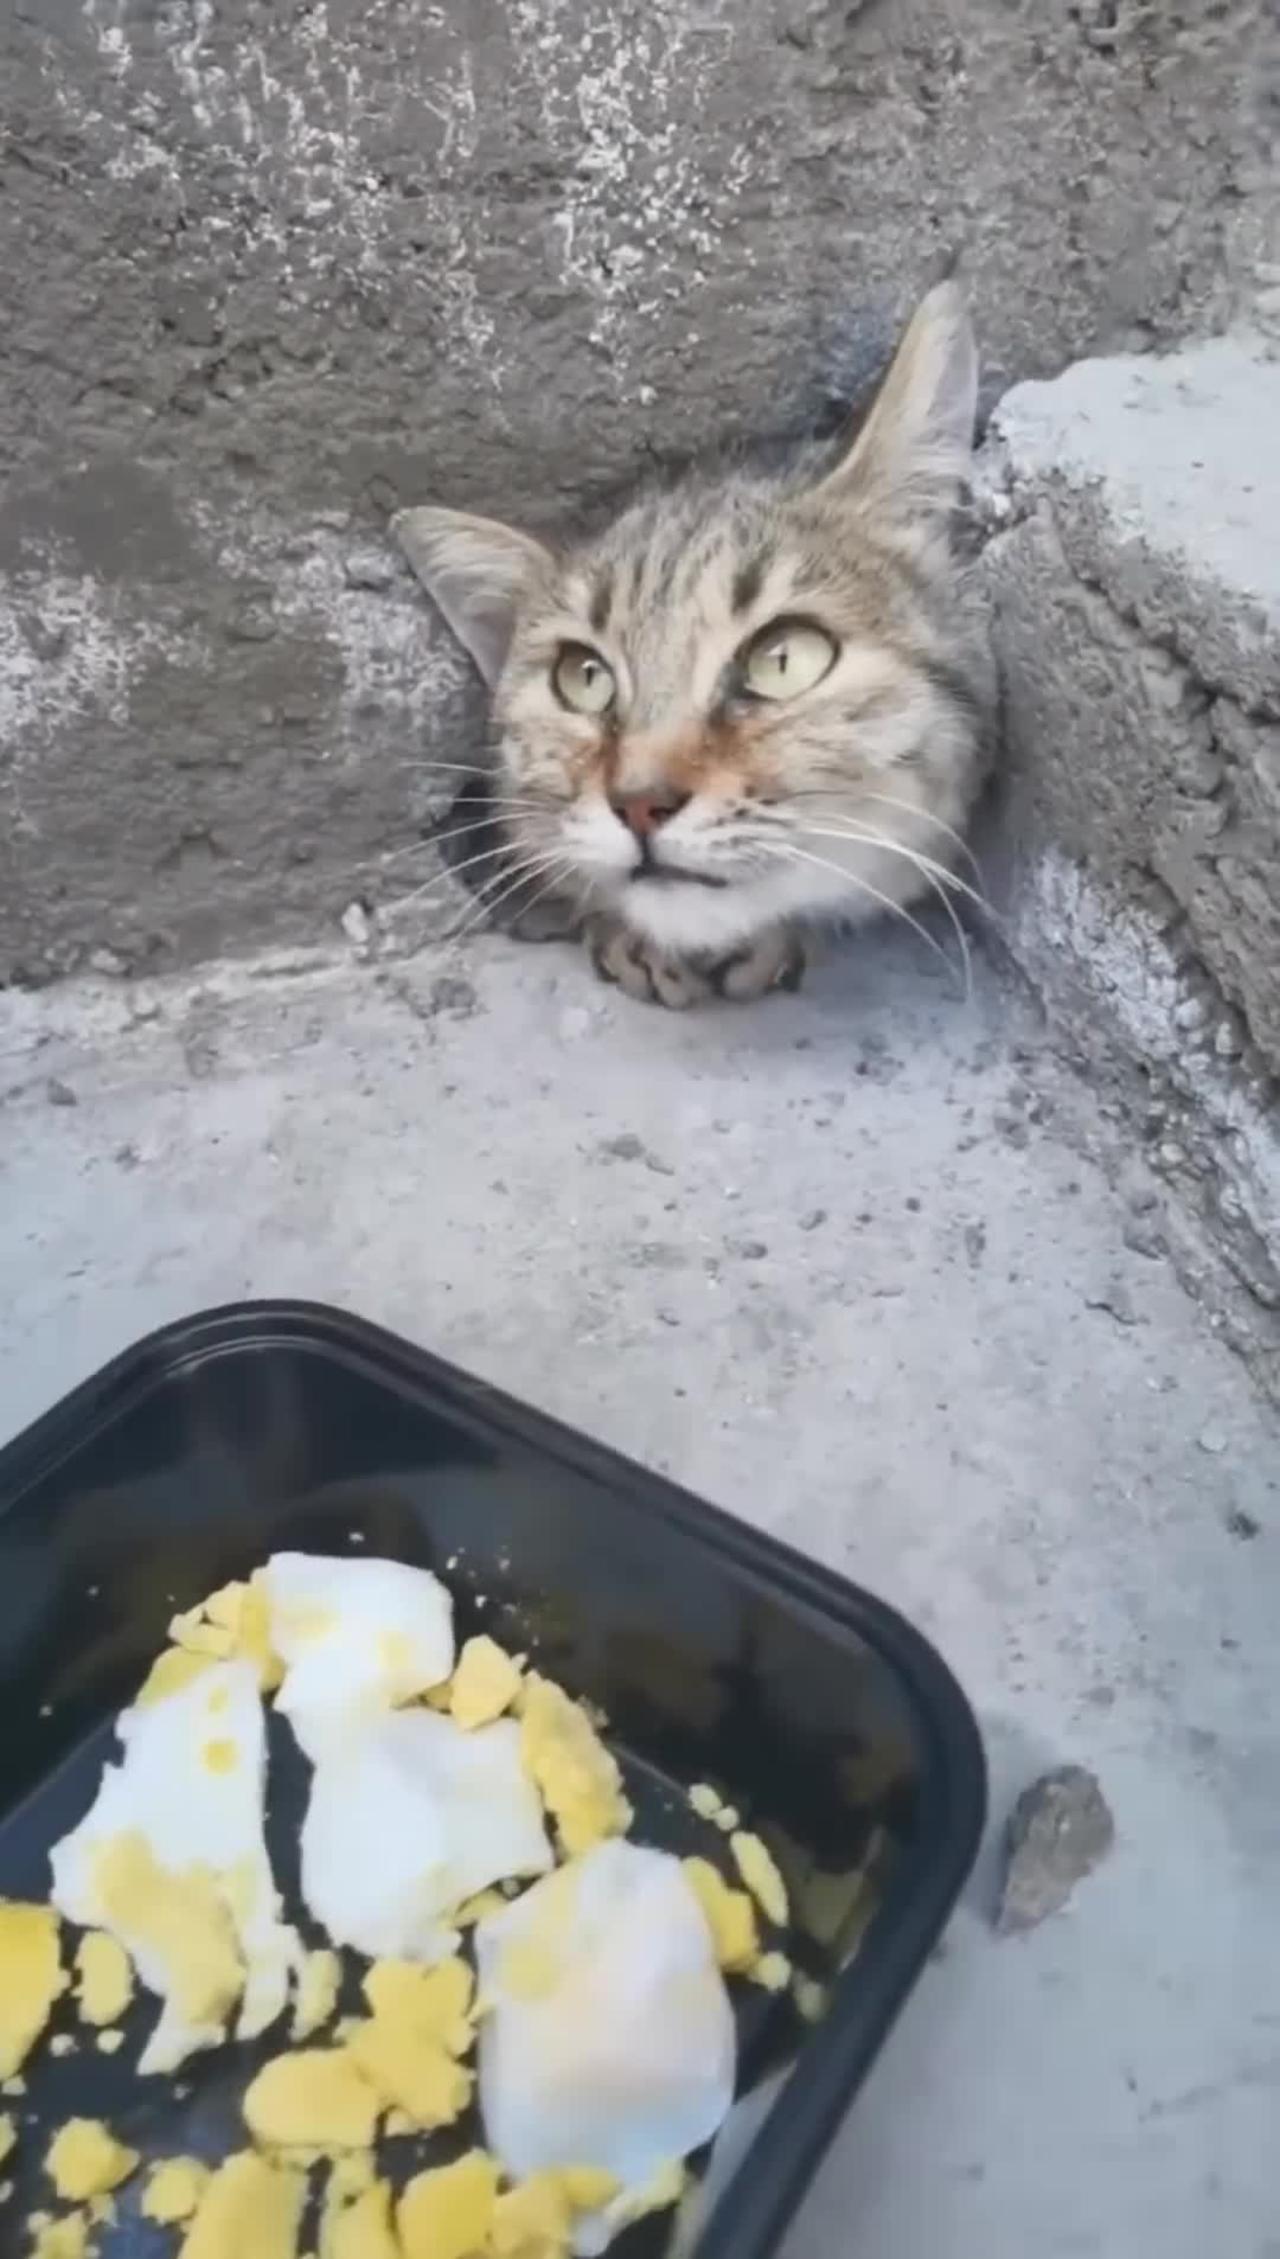 The Poor Cat is Sealed in Cement